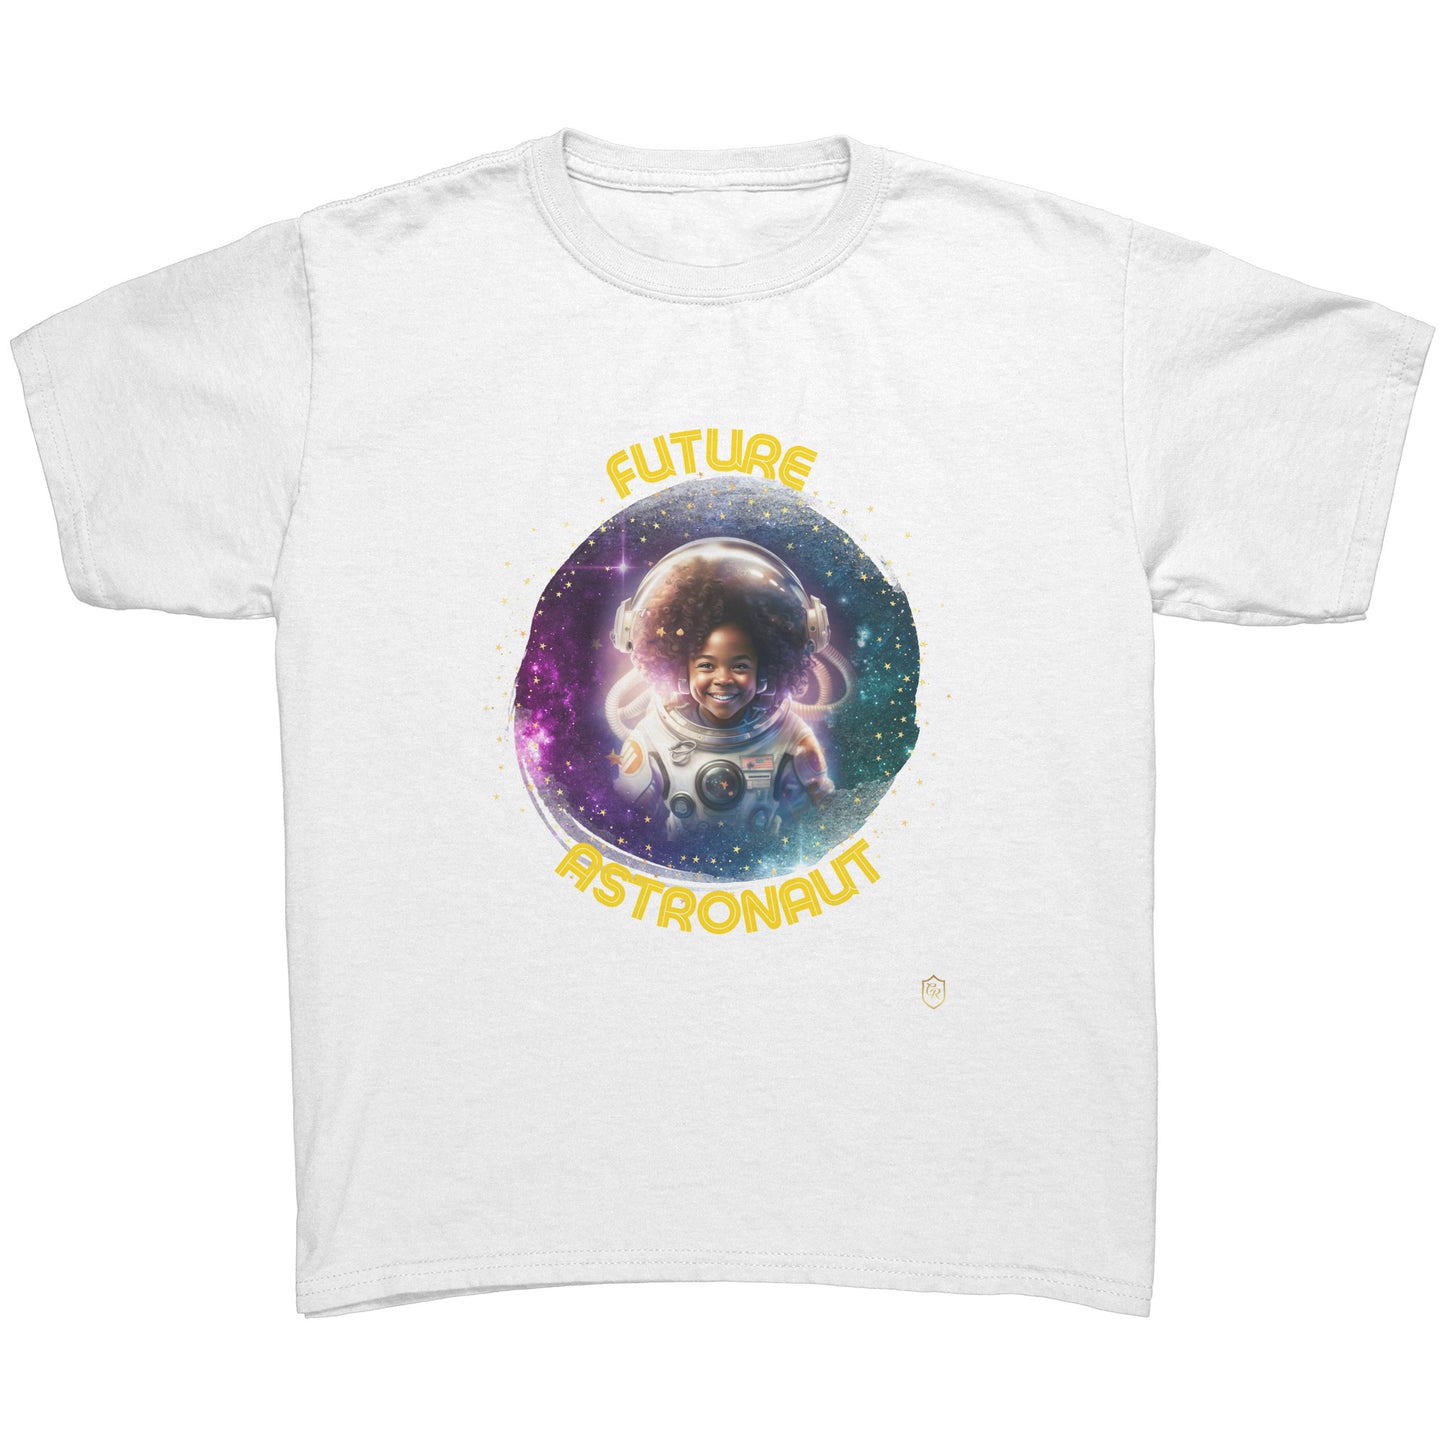 Young Girl's Galactic Explorer T-shirt: The Official Astronaut Gear of the Future